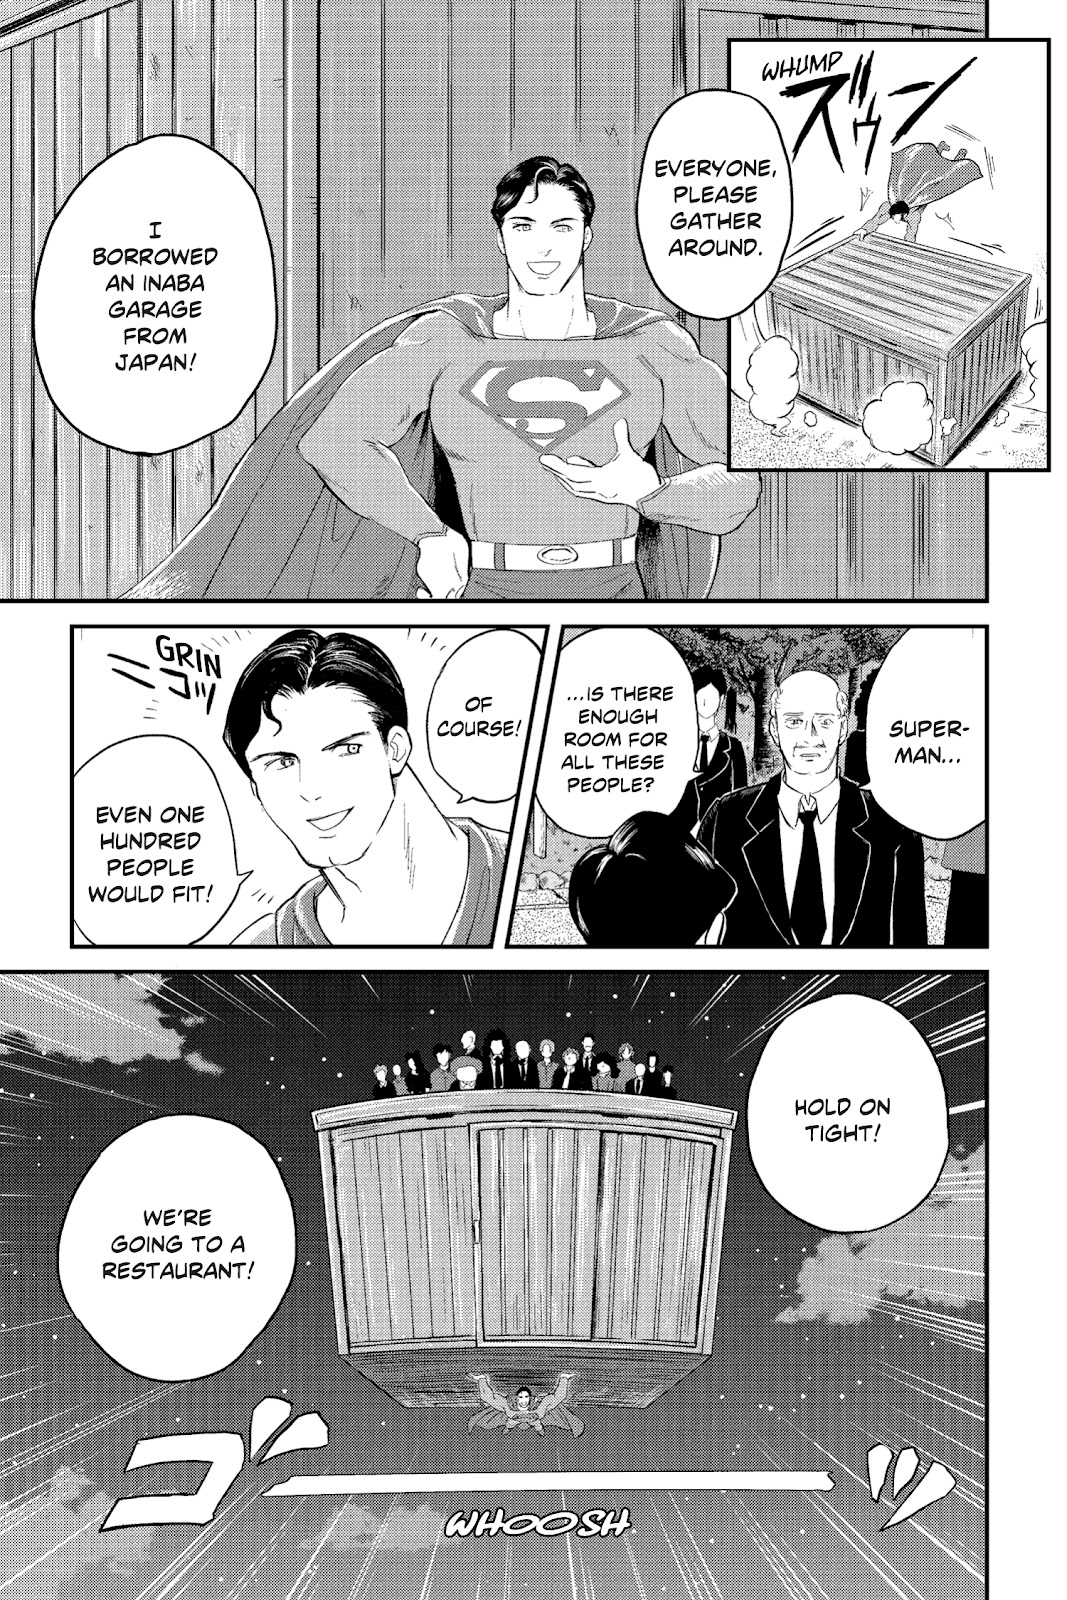 Superman vs. Meshi issue 17 - Page 7